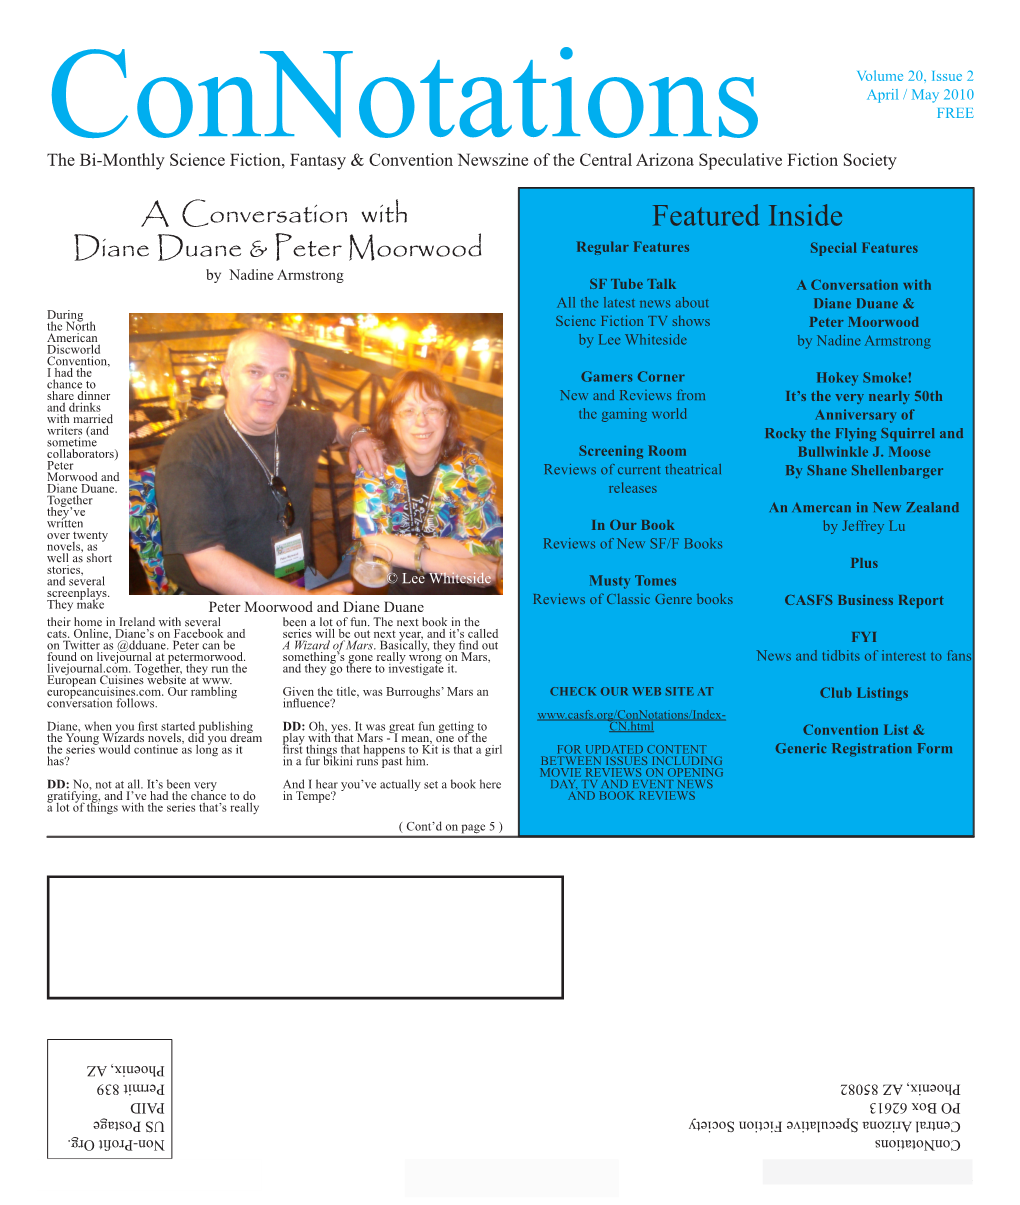 Connotations Volume 20 Issue 2.Indd